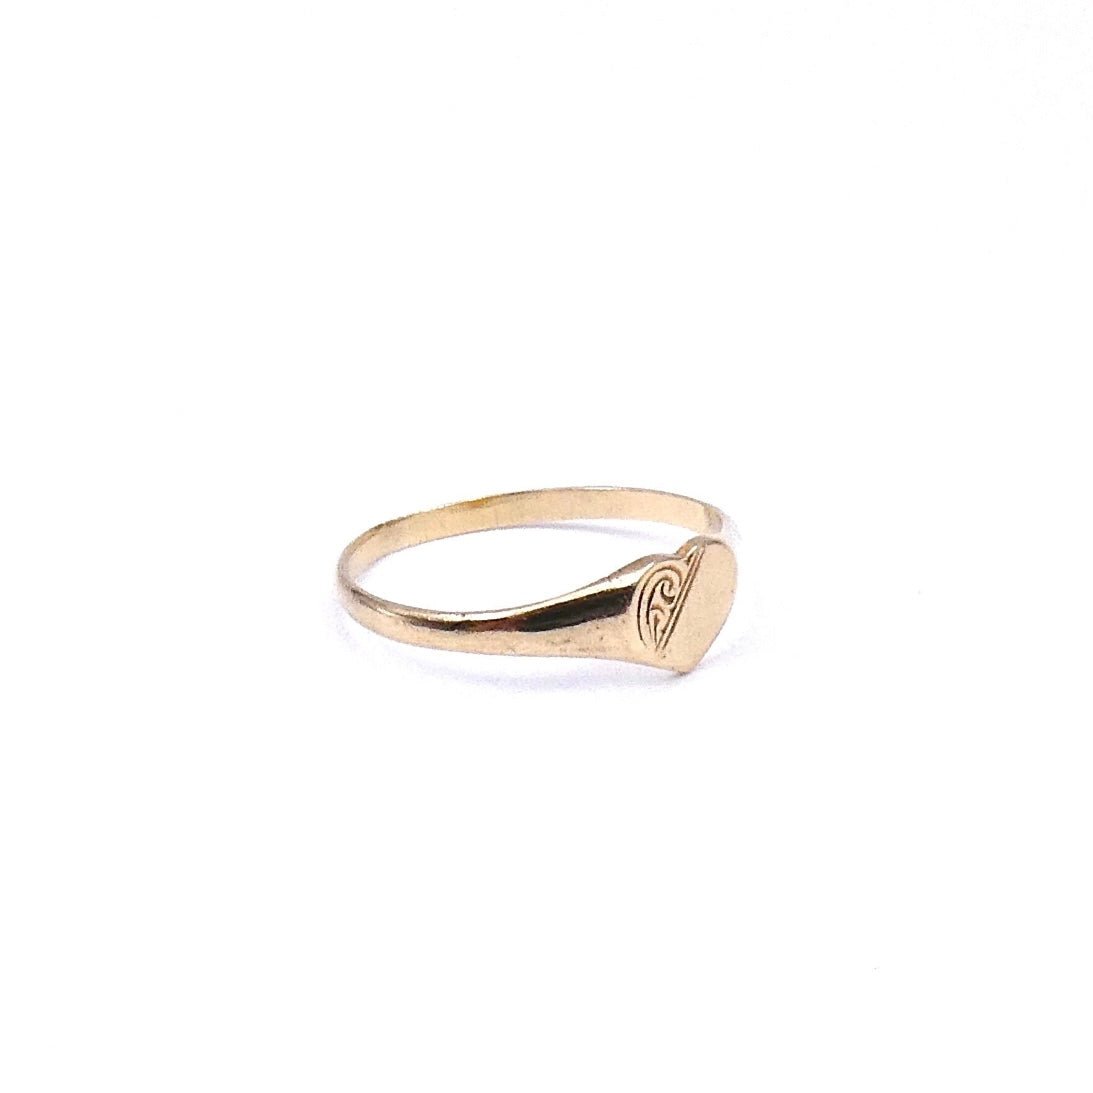 Gold heart ring, a small heart signet ring with a pattern across its face. - Collected